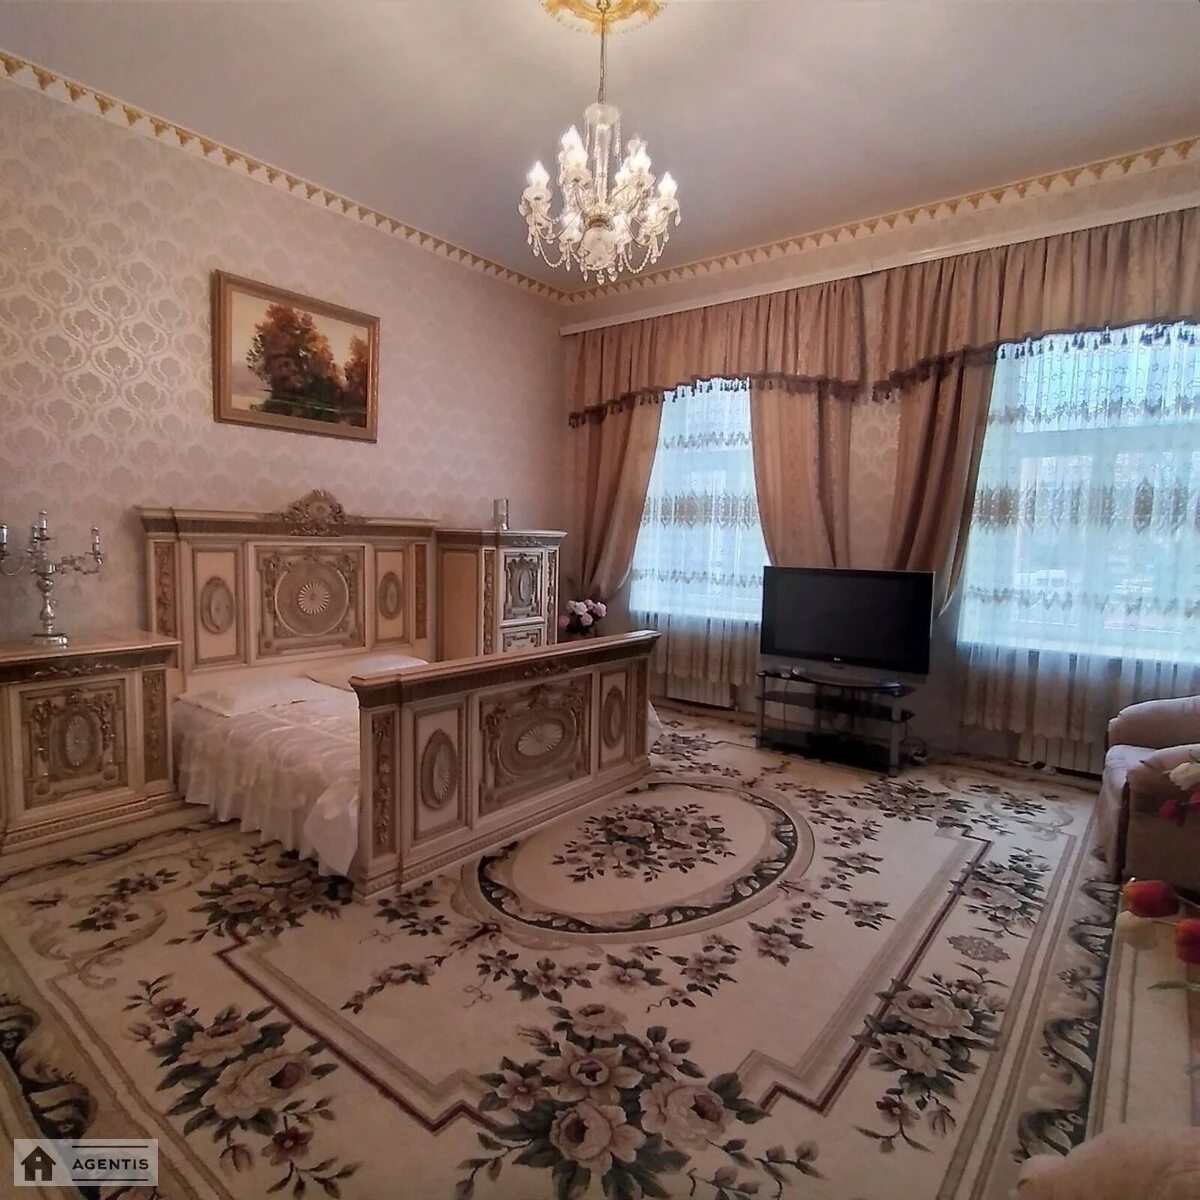 Apartment for rent. 4 rooms, 120 m², 2nd floor/4 floors. Pecherskyy rayon, Kyiv. 